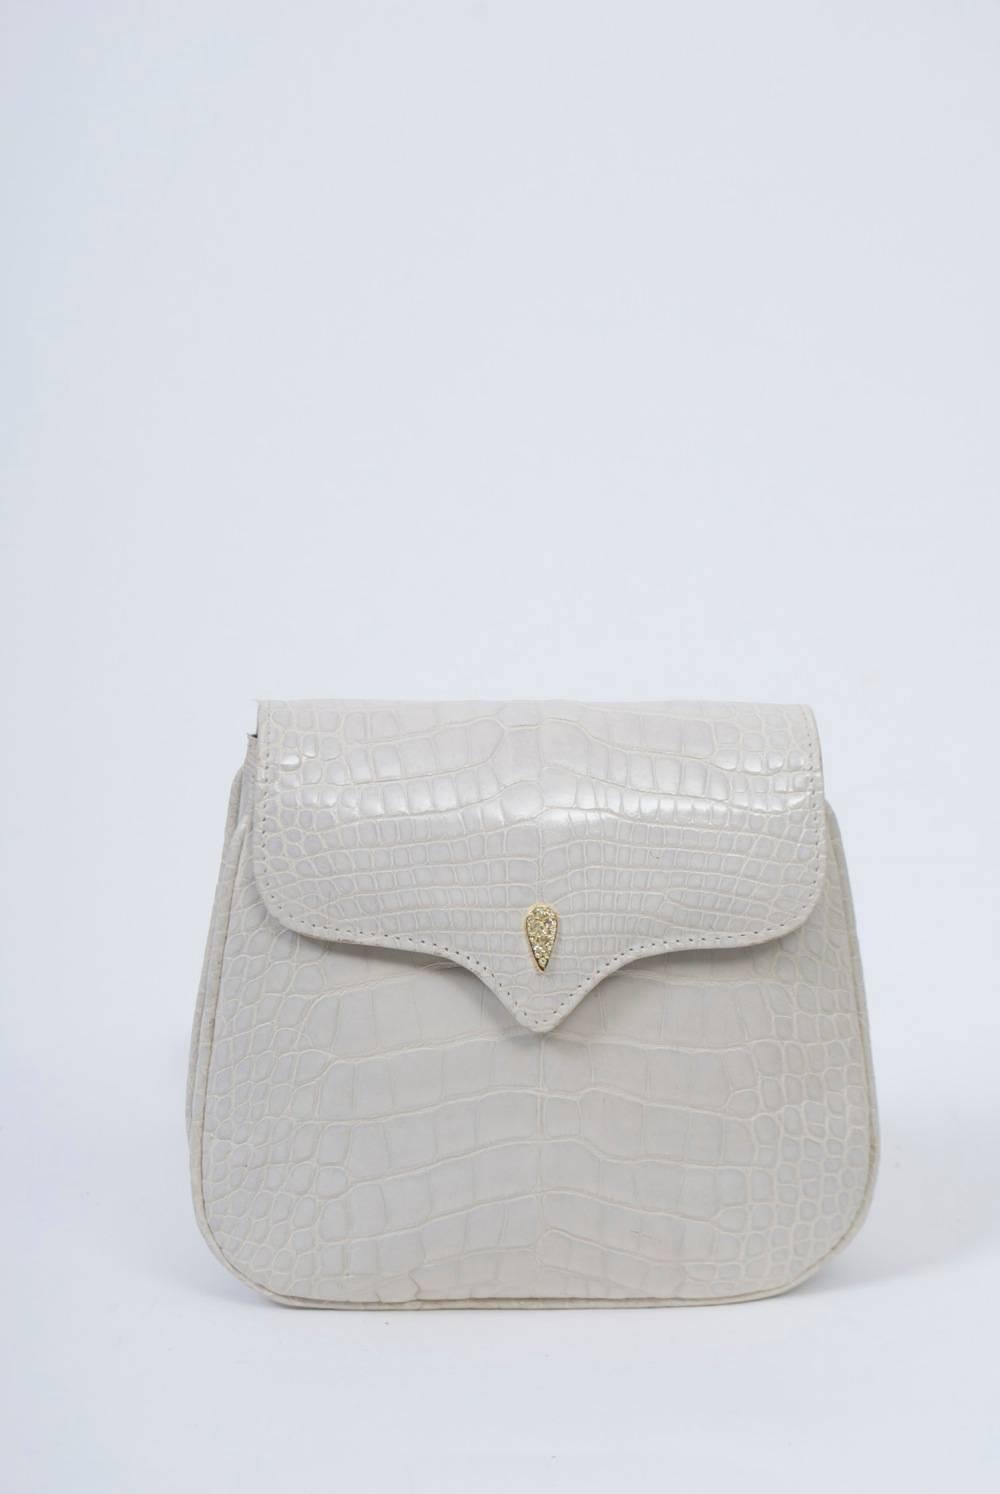 Gray Lana White Alligator Clutch with Two Shoulder Straps